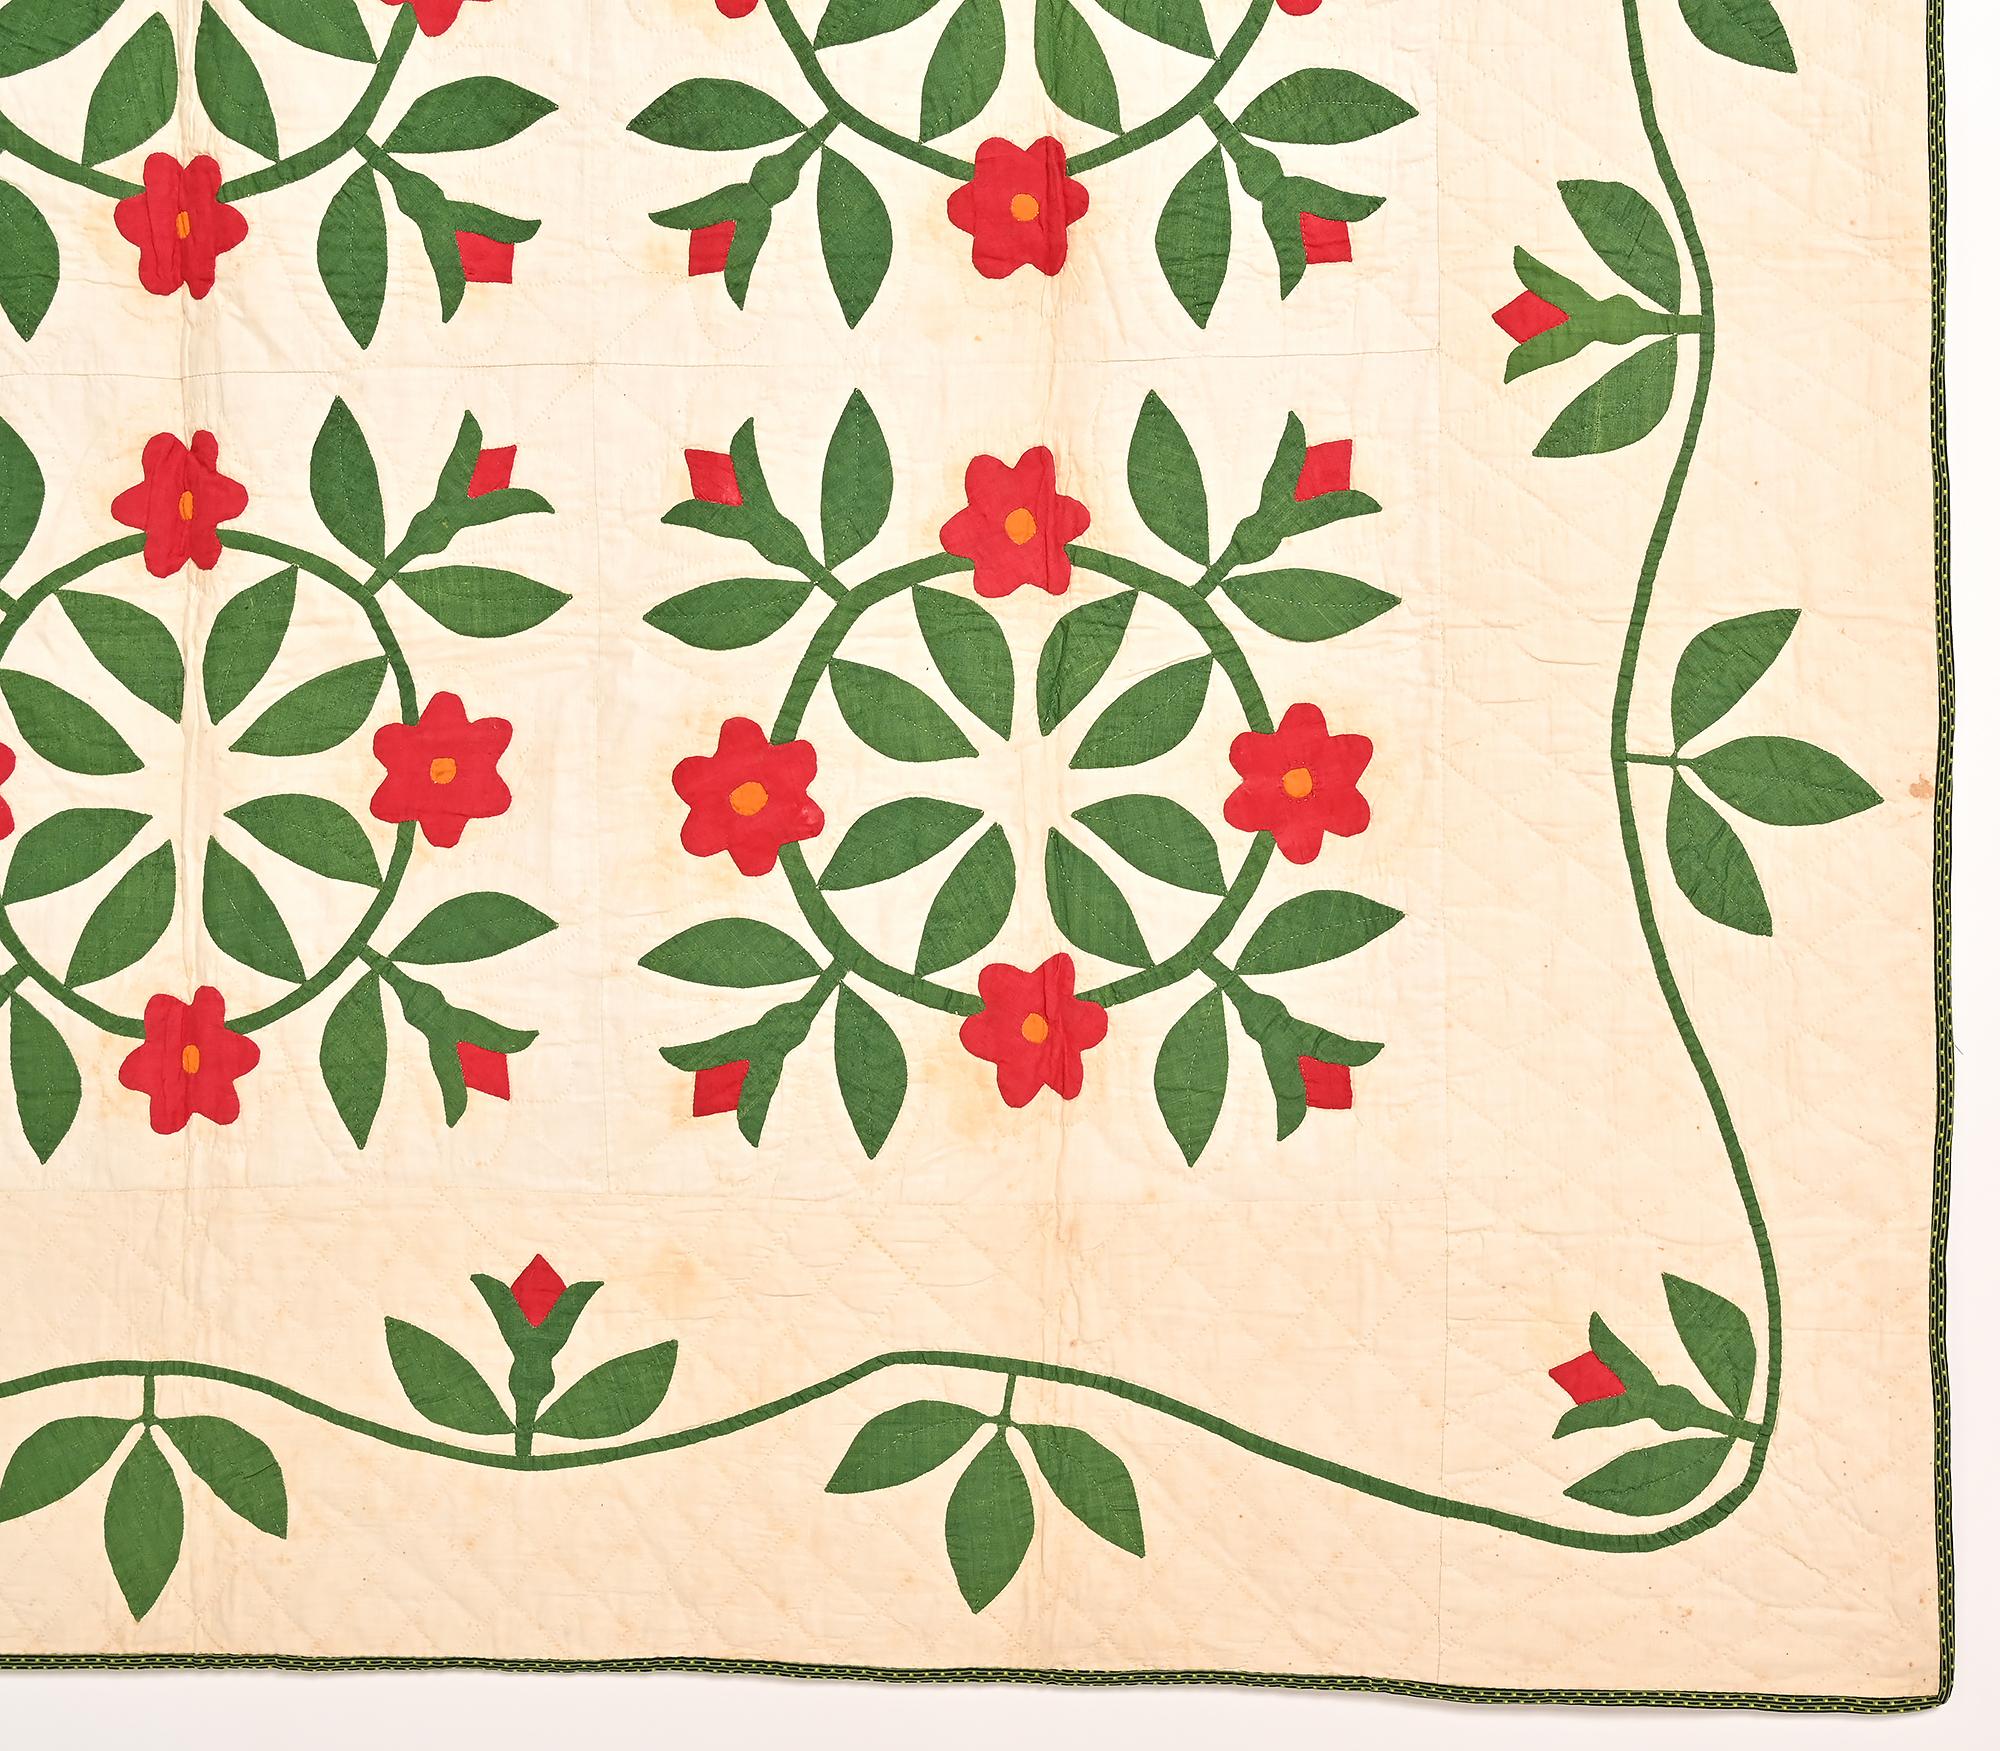 American Rose Wreaths Quilt For Sale